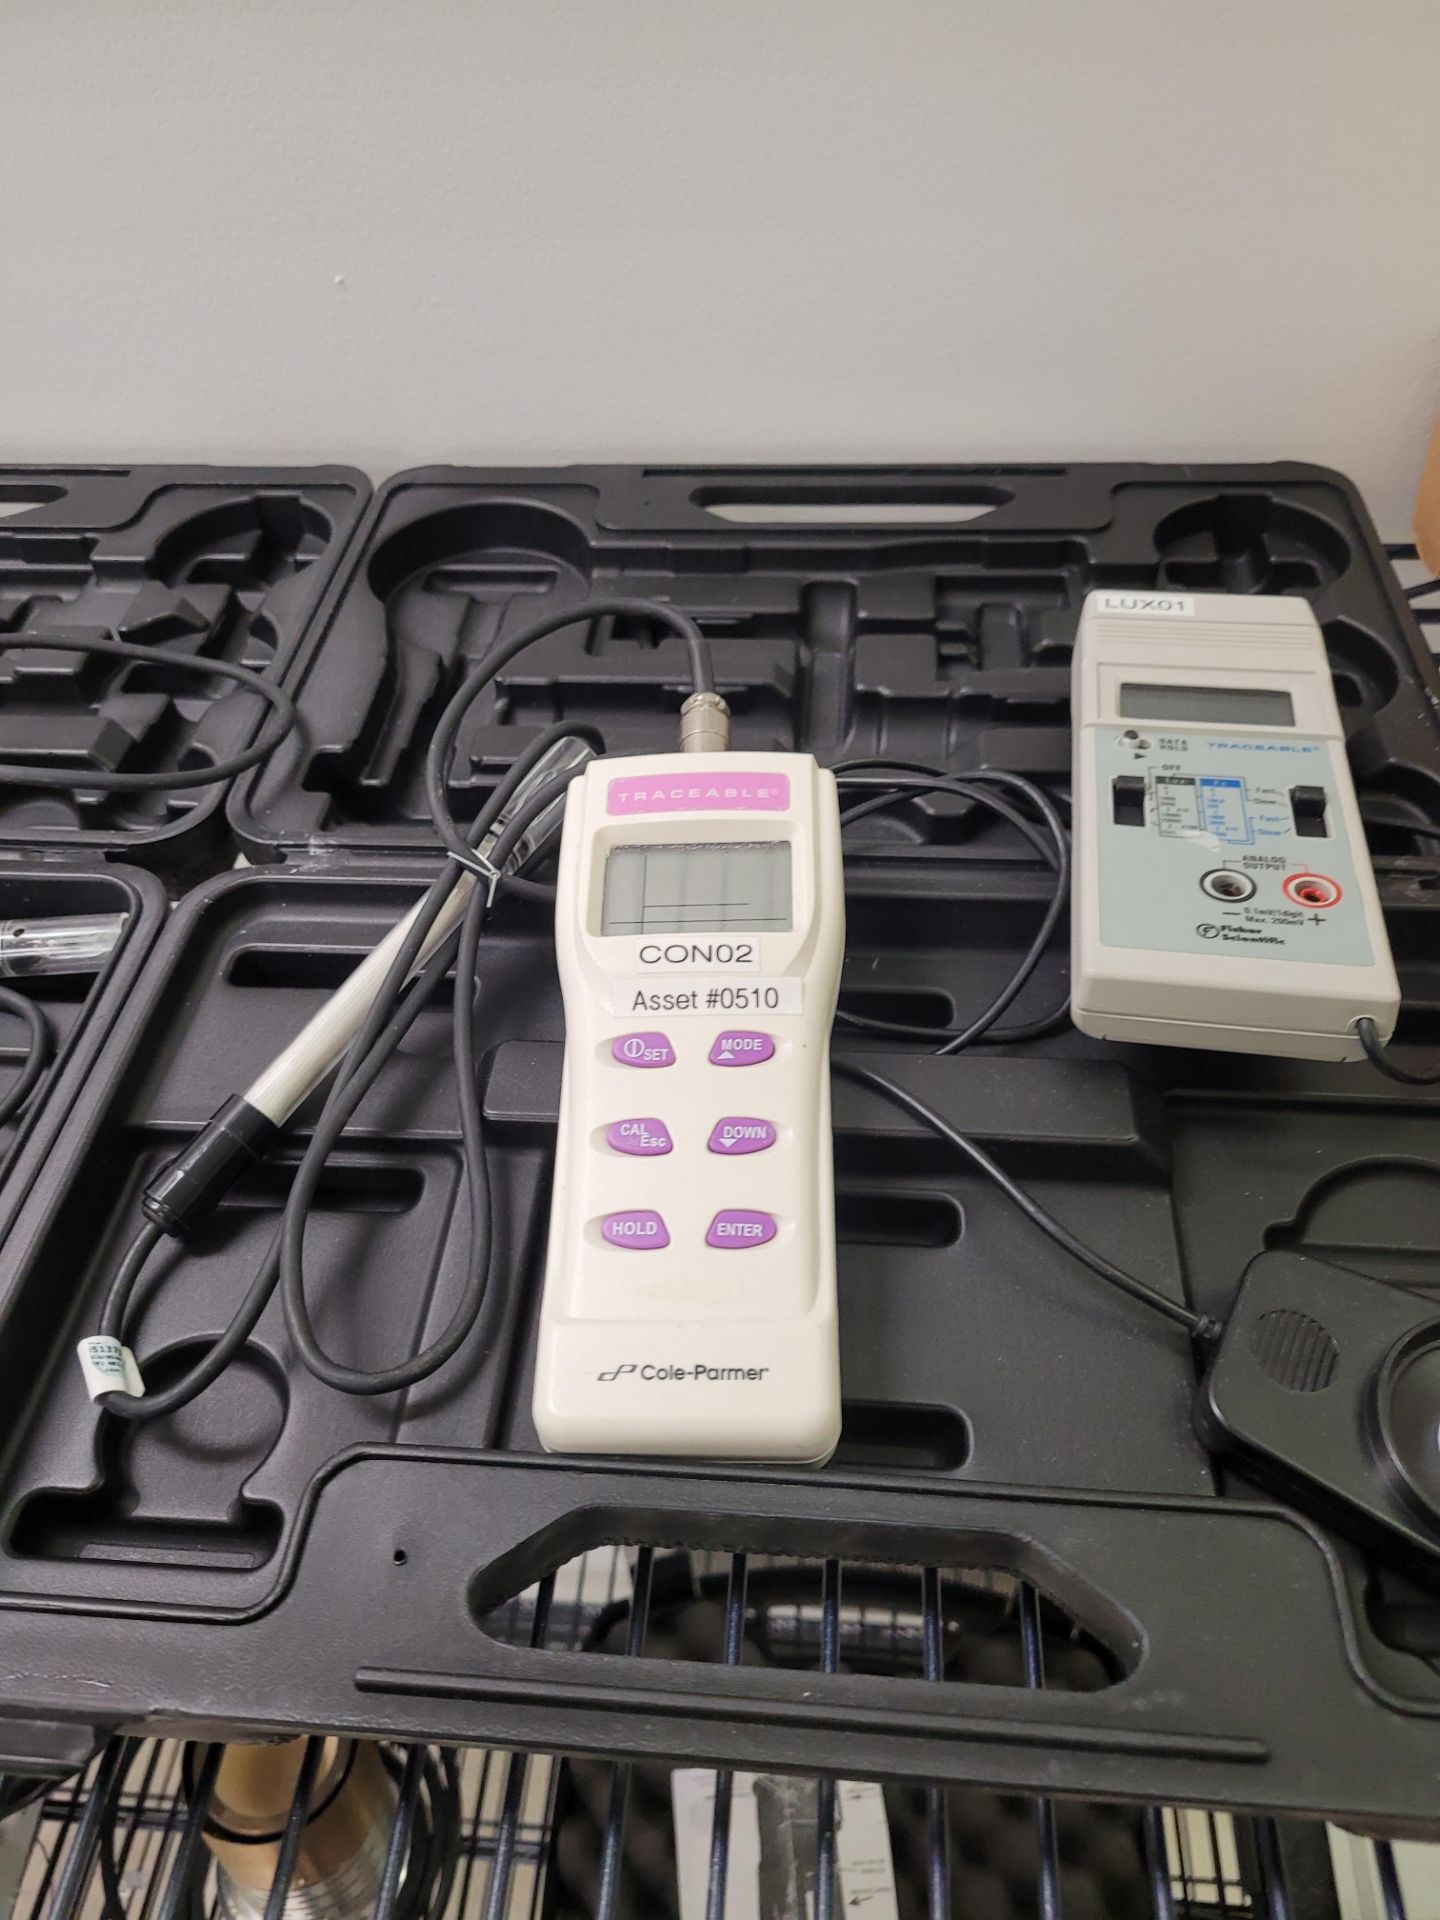 Lot of COLE-PARMER Traceable Portable Conductivity Meter and FISHER SCIENTIFIC Traceable Dual-Range